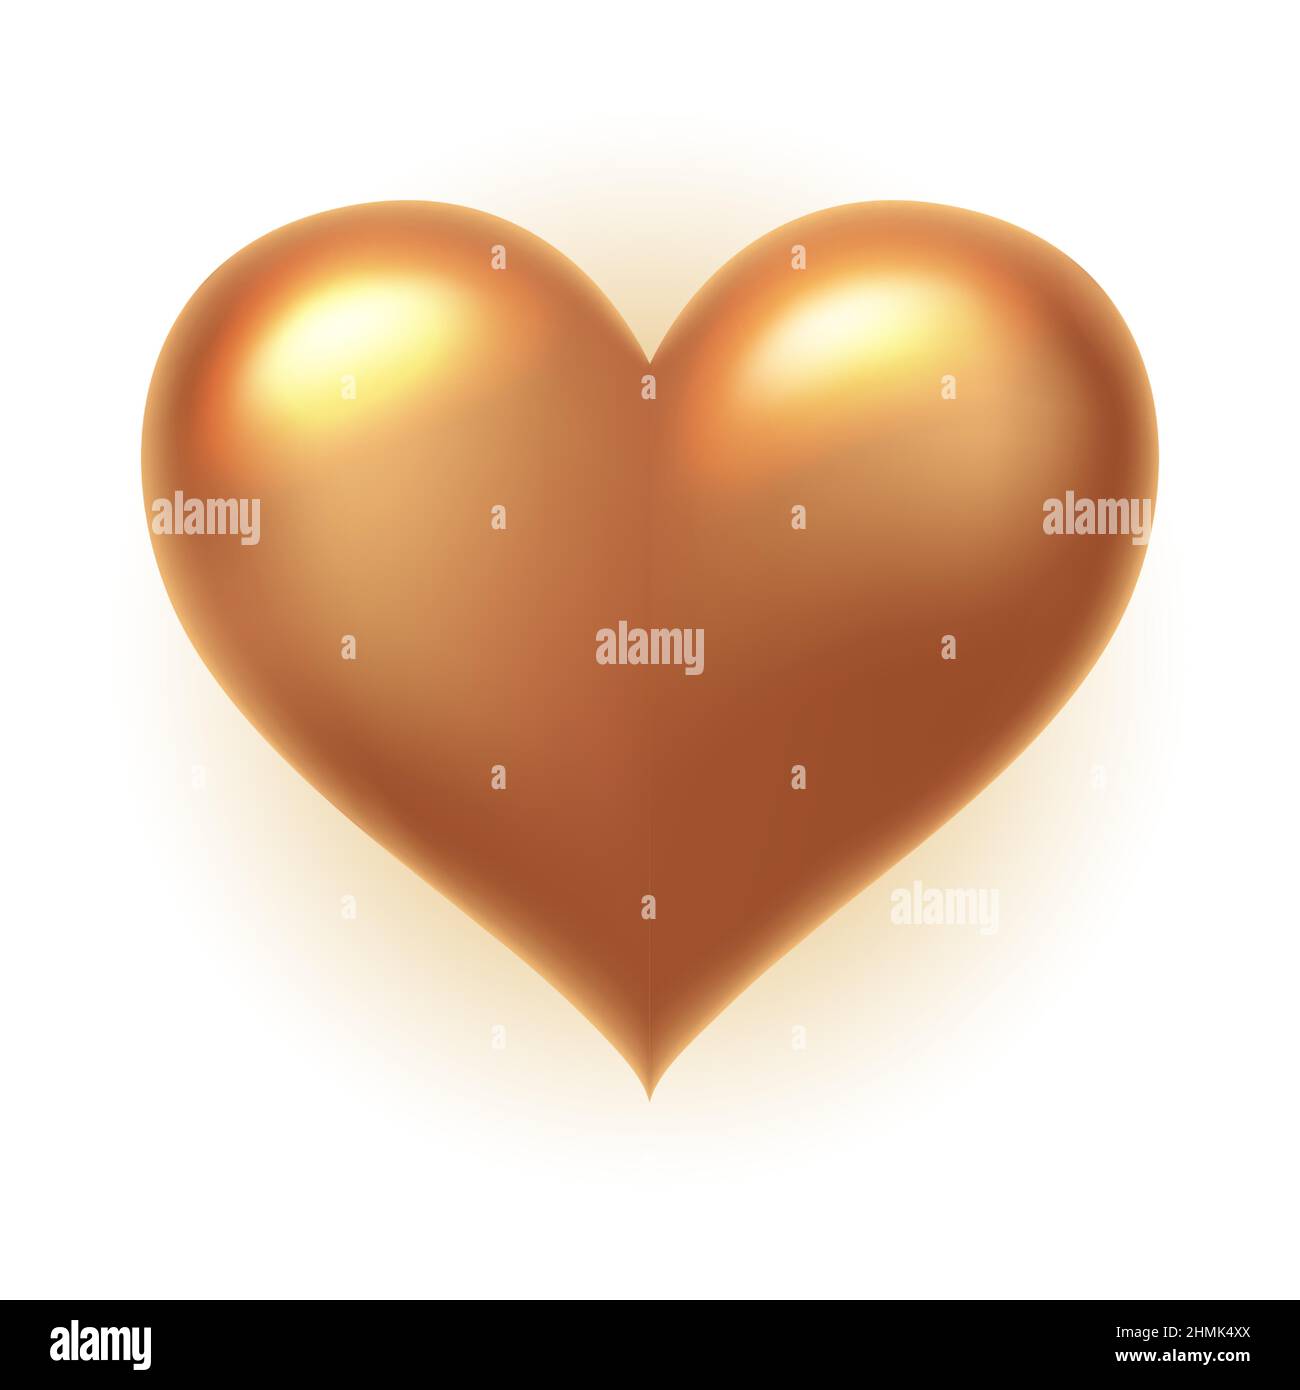 Gold glossy 3D heart shape isolated on a transparent background. A symbol of love, an element for decorating holidays, wedding invitations, and Stock Vector